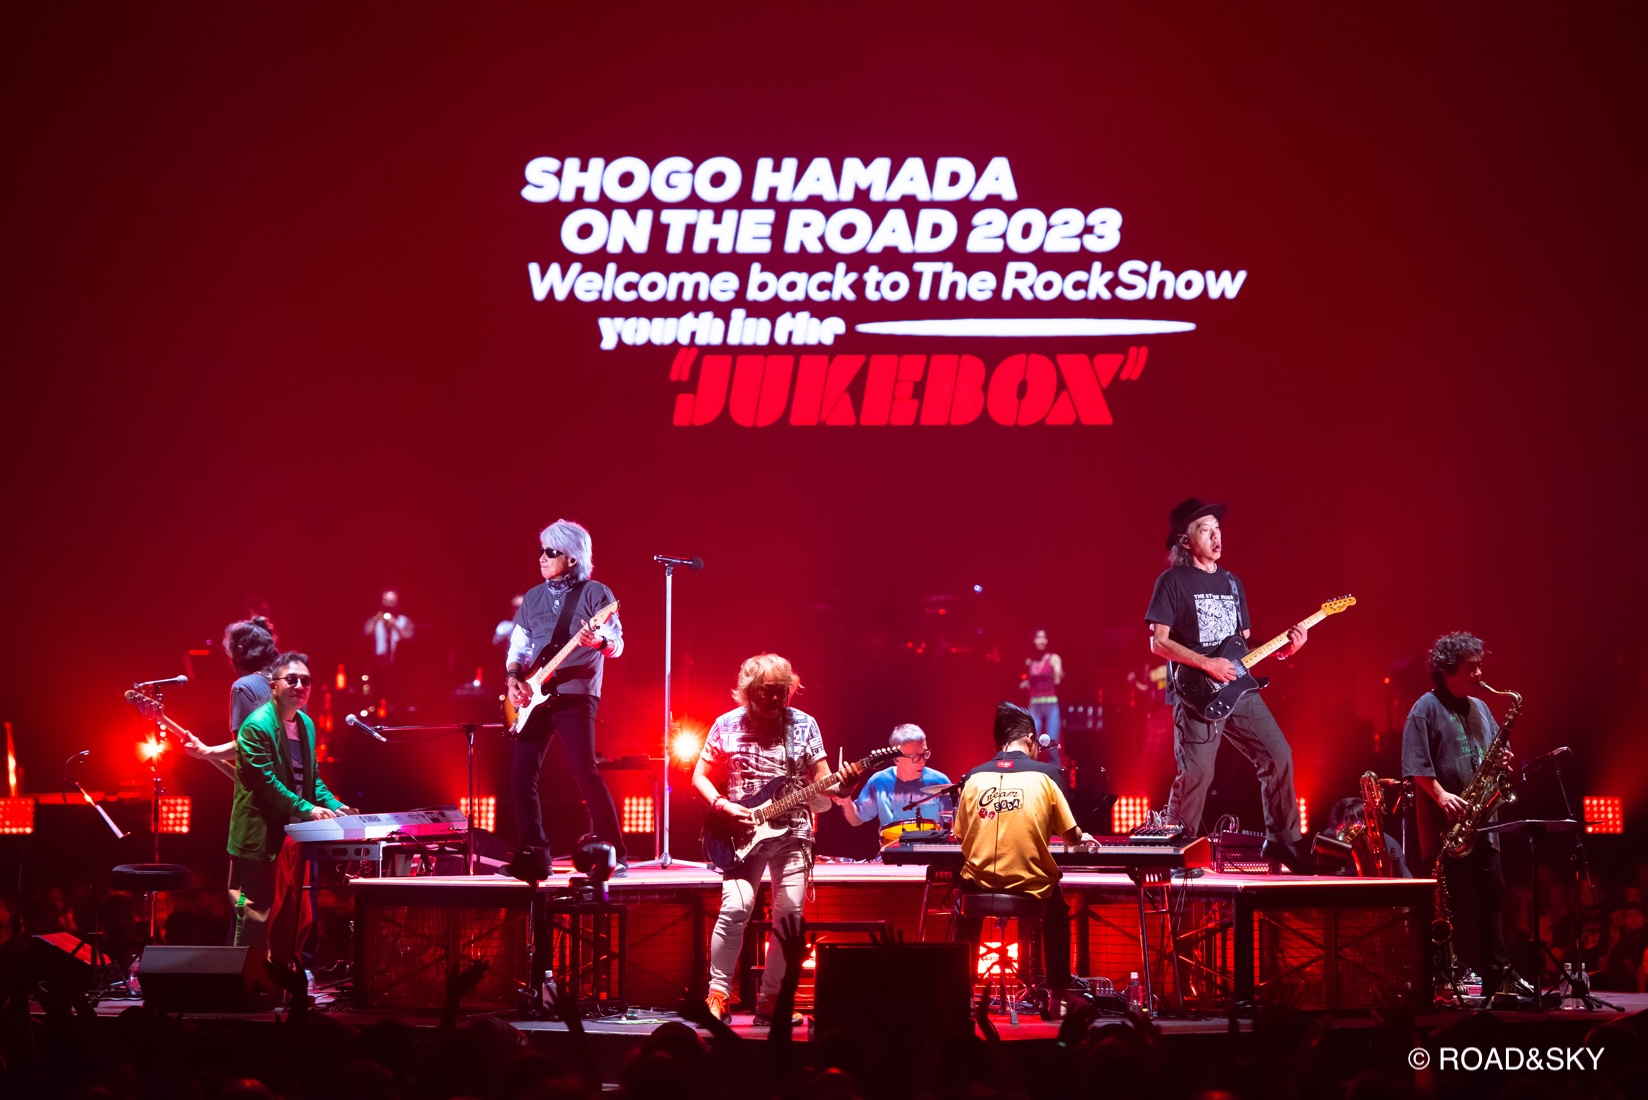 『SHOGO HAMADA ON THE ROAD 2023 Welcome back to The Rock Show youth in the “JUKEBOX”』浜田省吾 ライブ写真3